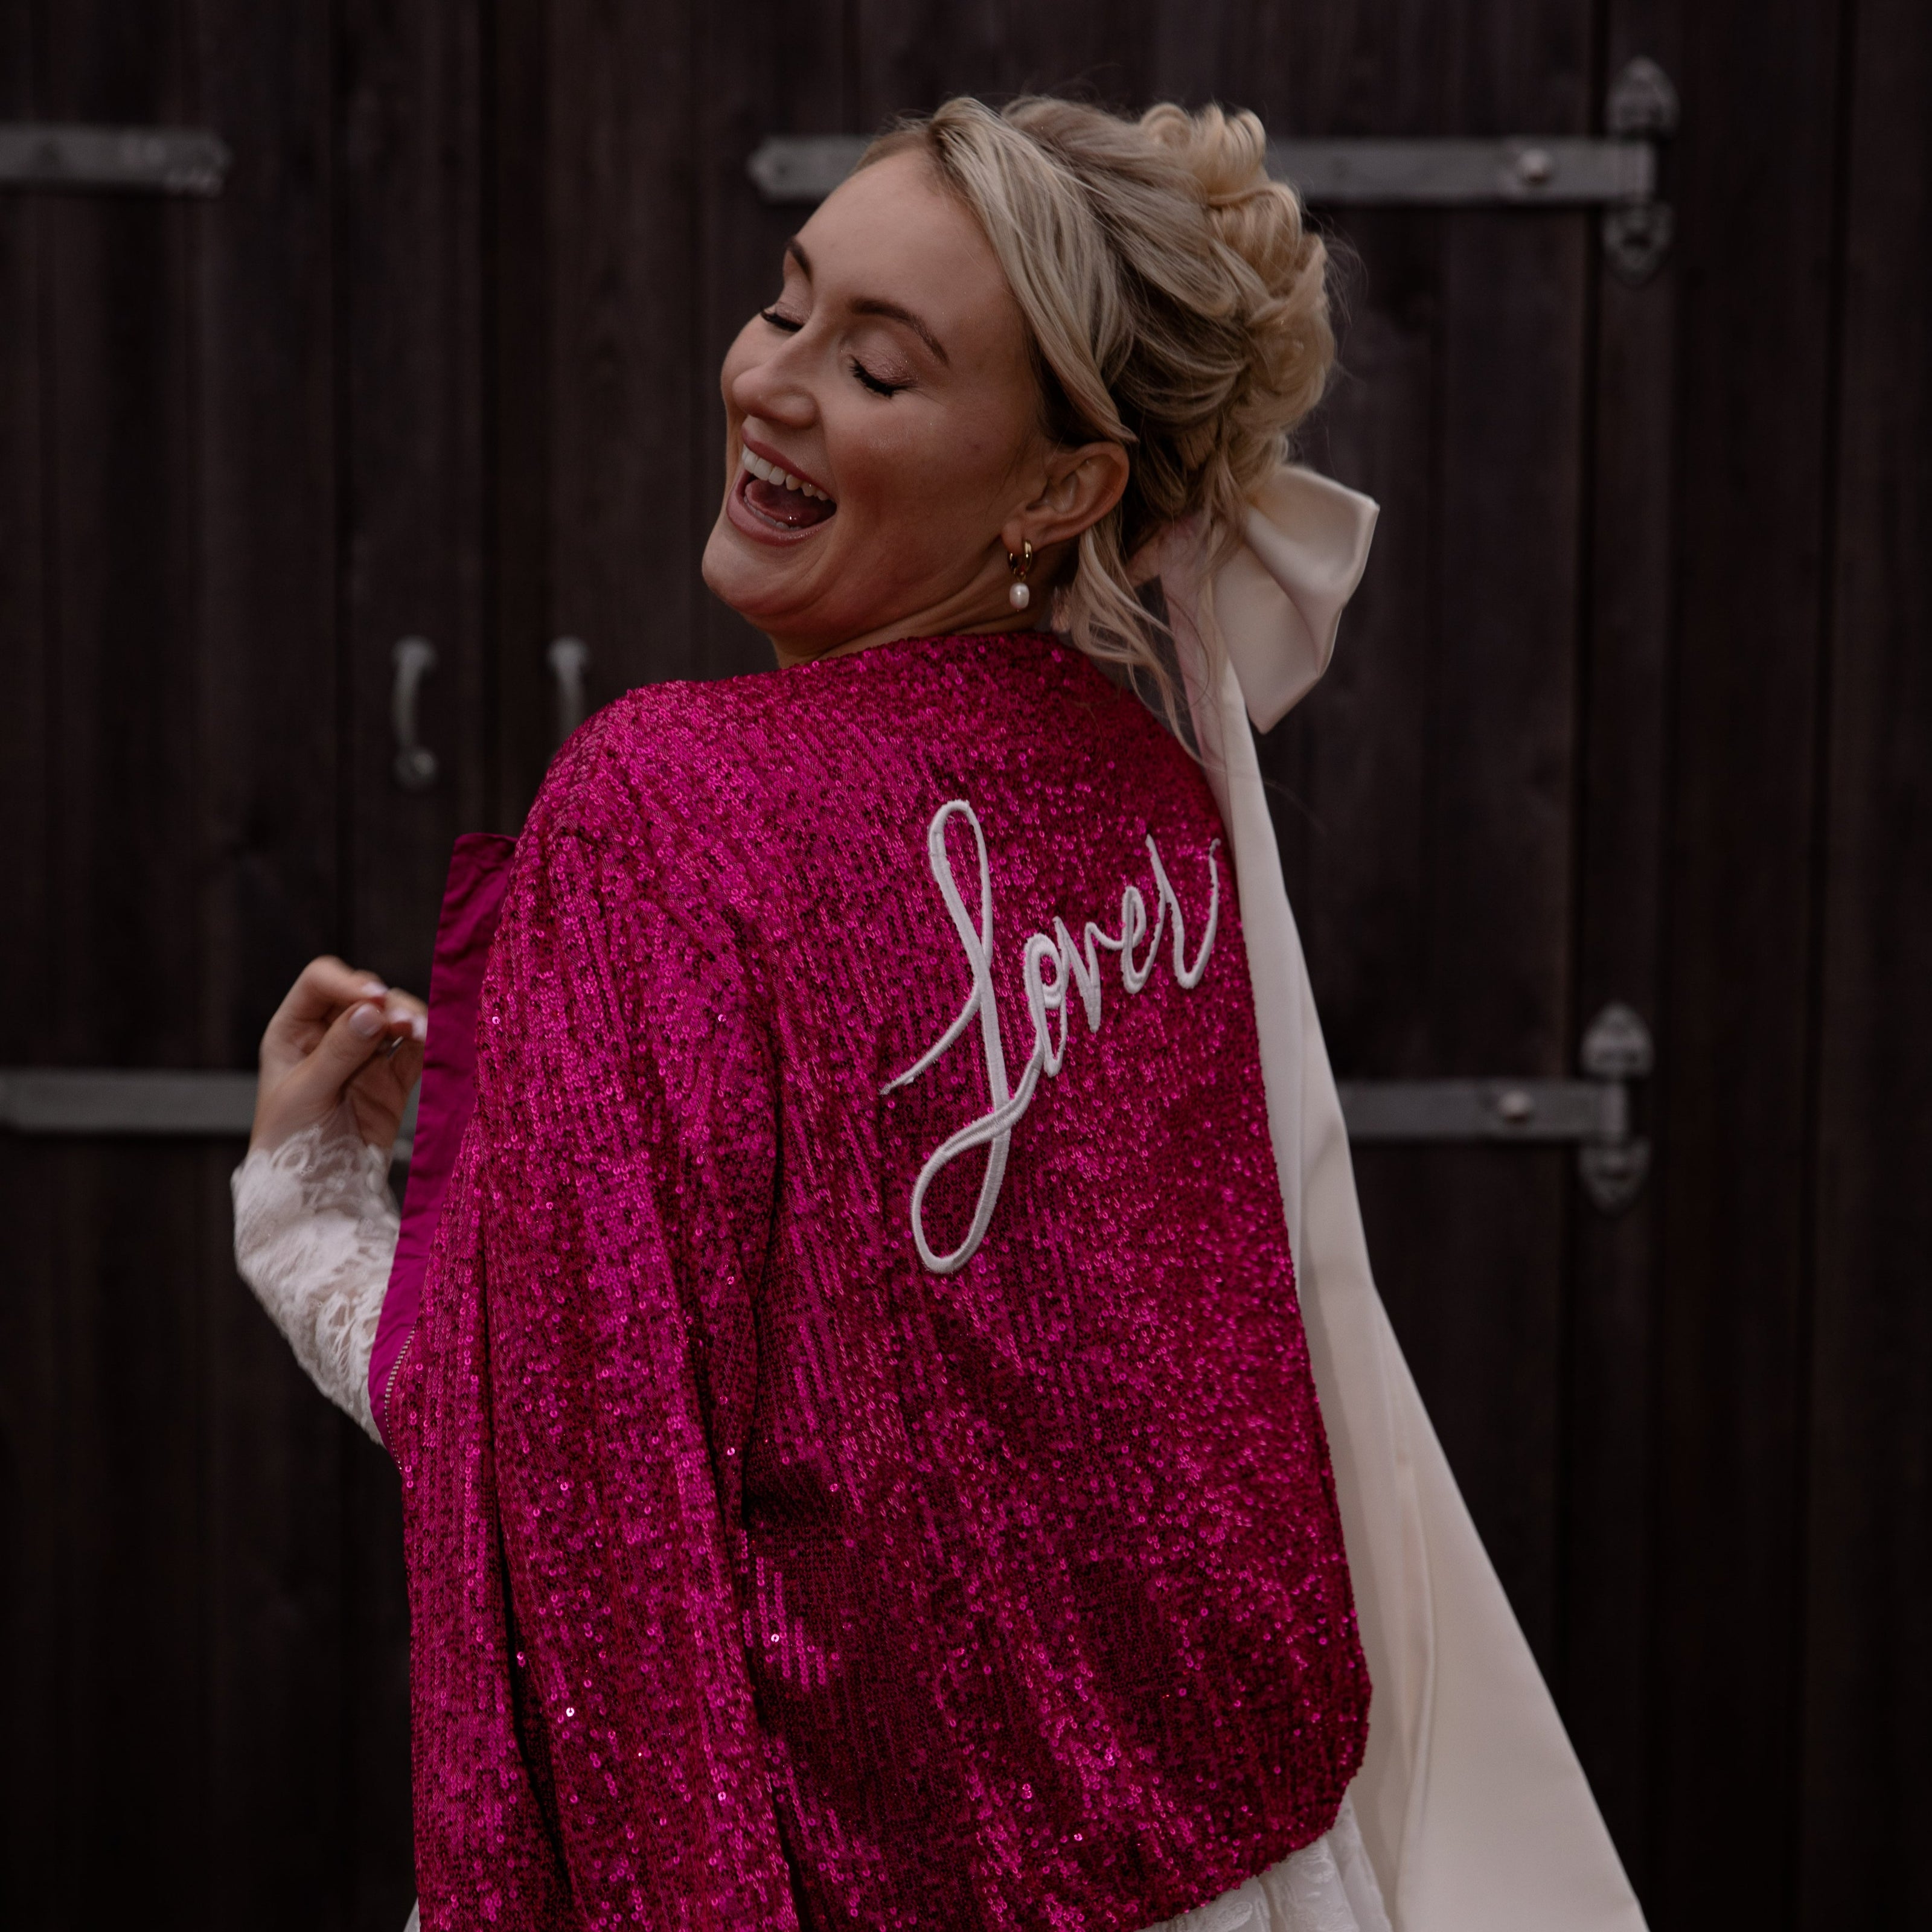 Dazzle in style with this sparkly pink sequin jacket, the perfect bridal cover-up that doubles as a stunning festival jacket